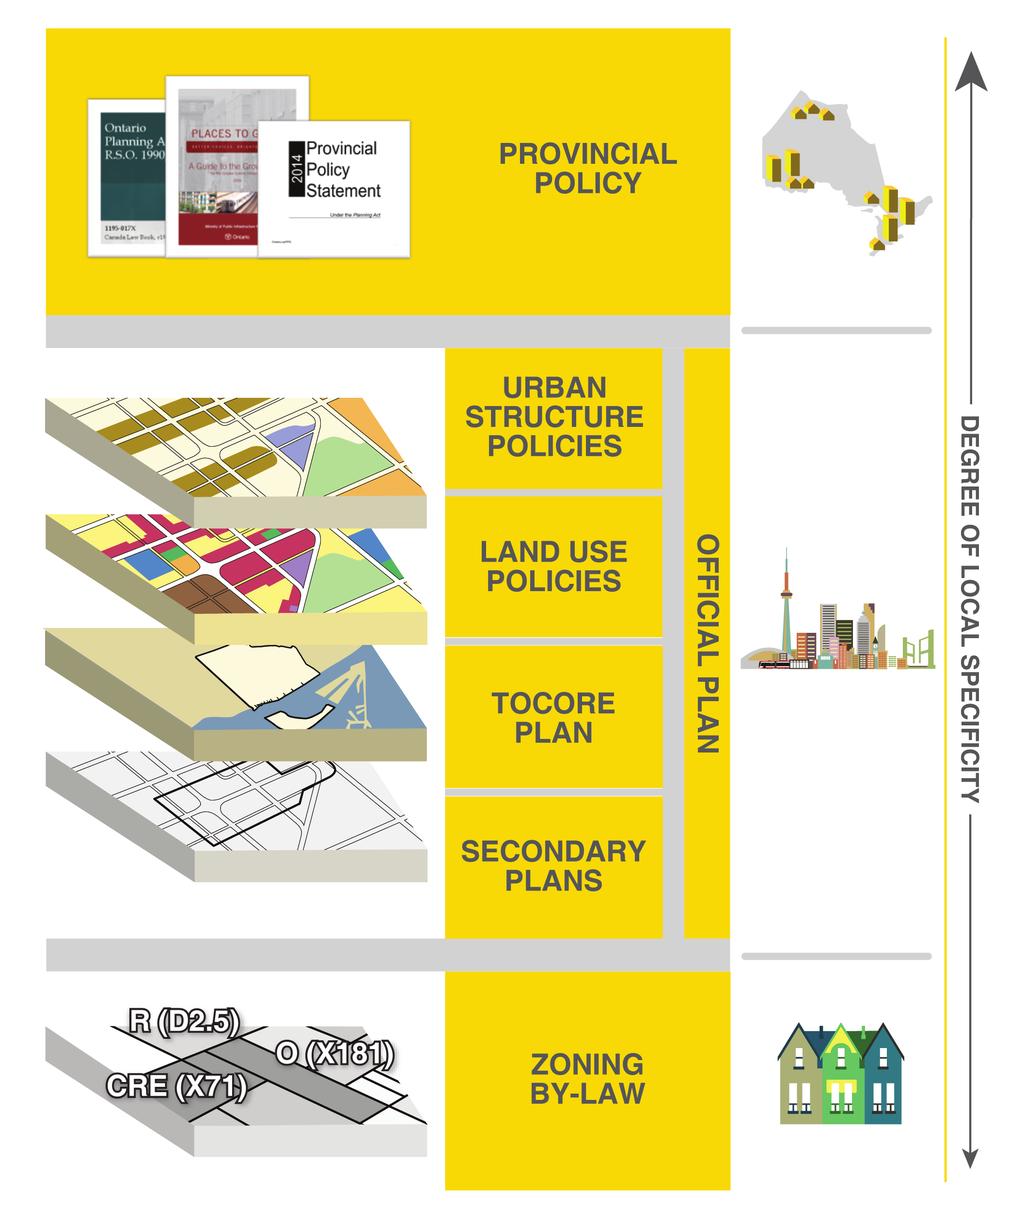 DOWNTOWN PLANNING FRAMEWORK TOcore Study Area Dupont St po C N R er iv v en eda Bloor St W le V alley Green Space Rd Bloor St E Charles St W Danforth Ave Charles St E College St Queen St W Richmond